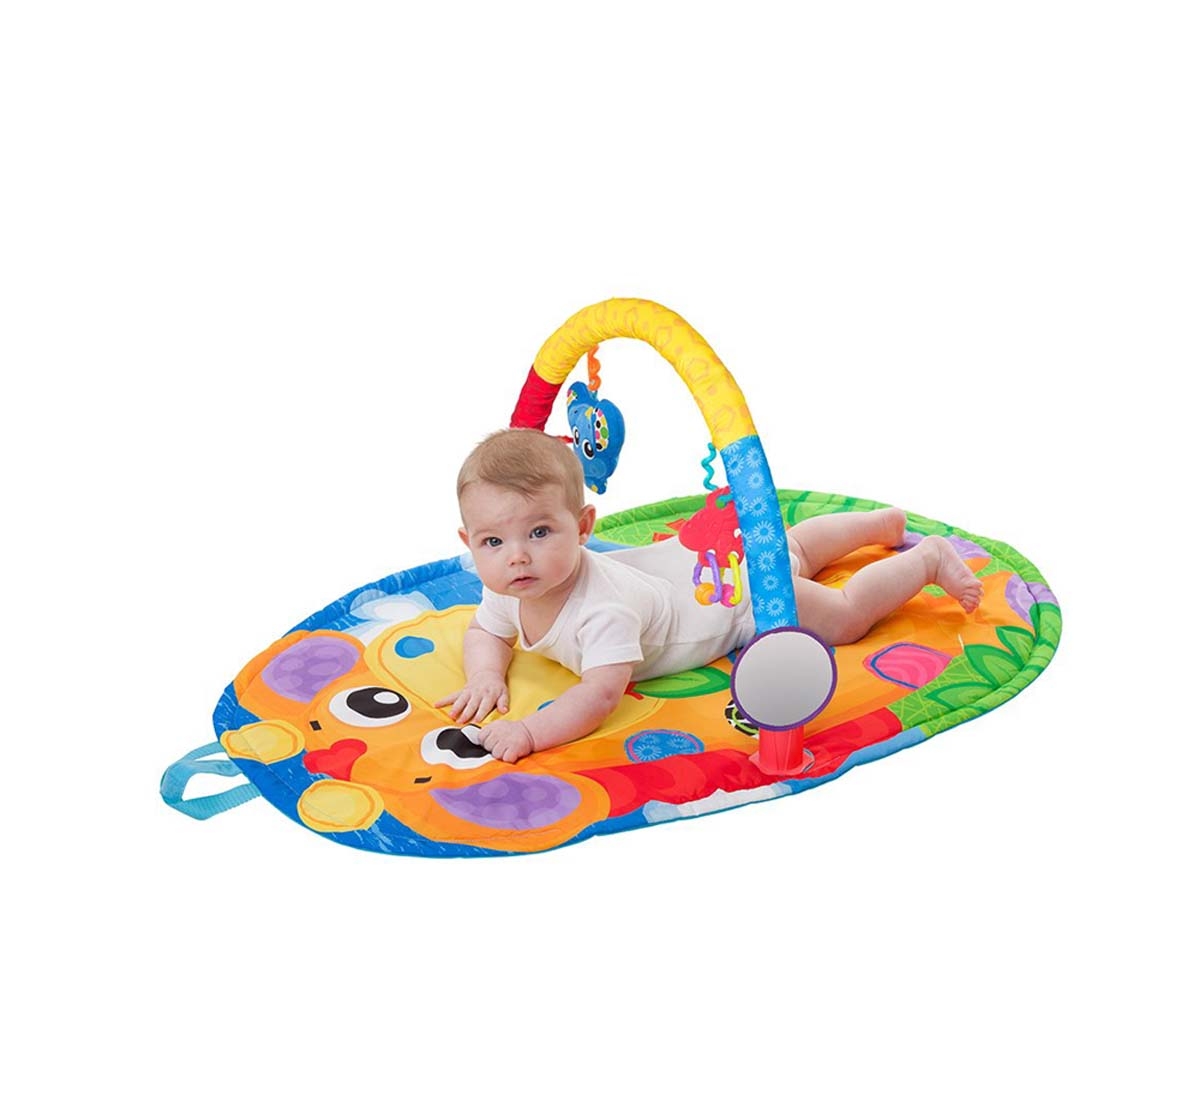 Playgro | Playgro Jerry Giraffe Activity Gym Baby Gear for Kids age 0M+ 